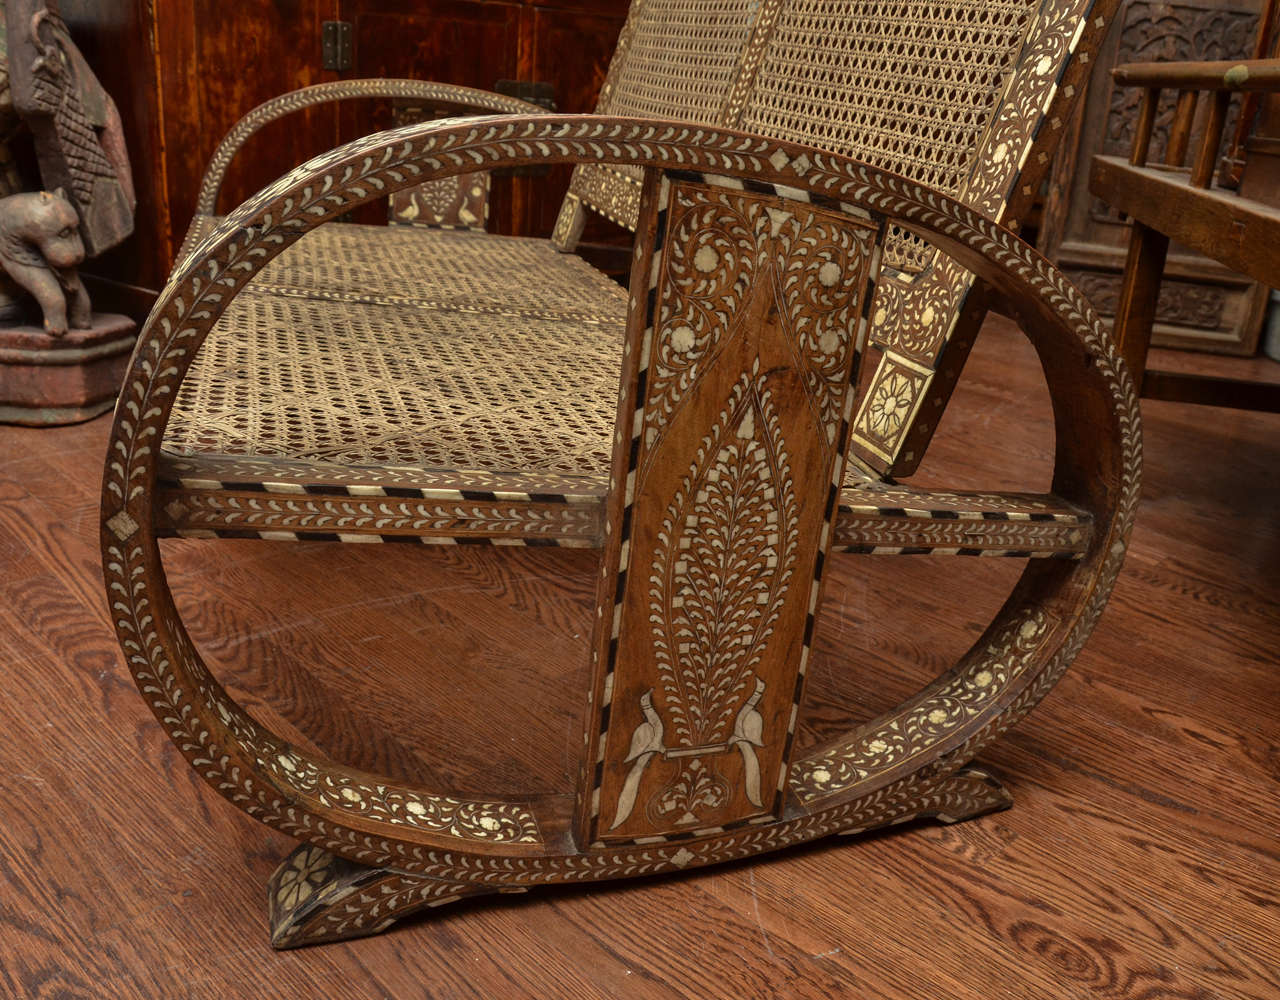 Anglo-Indian Horn and Bone Inlaid Settee with Caned Back and Seat 1